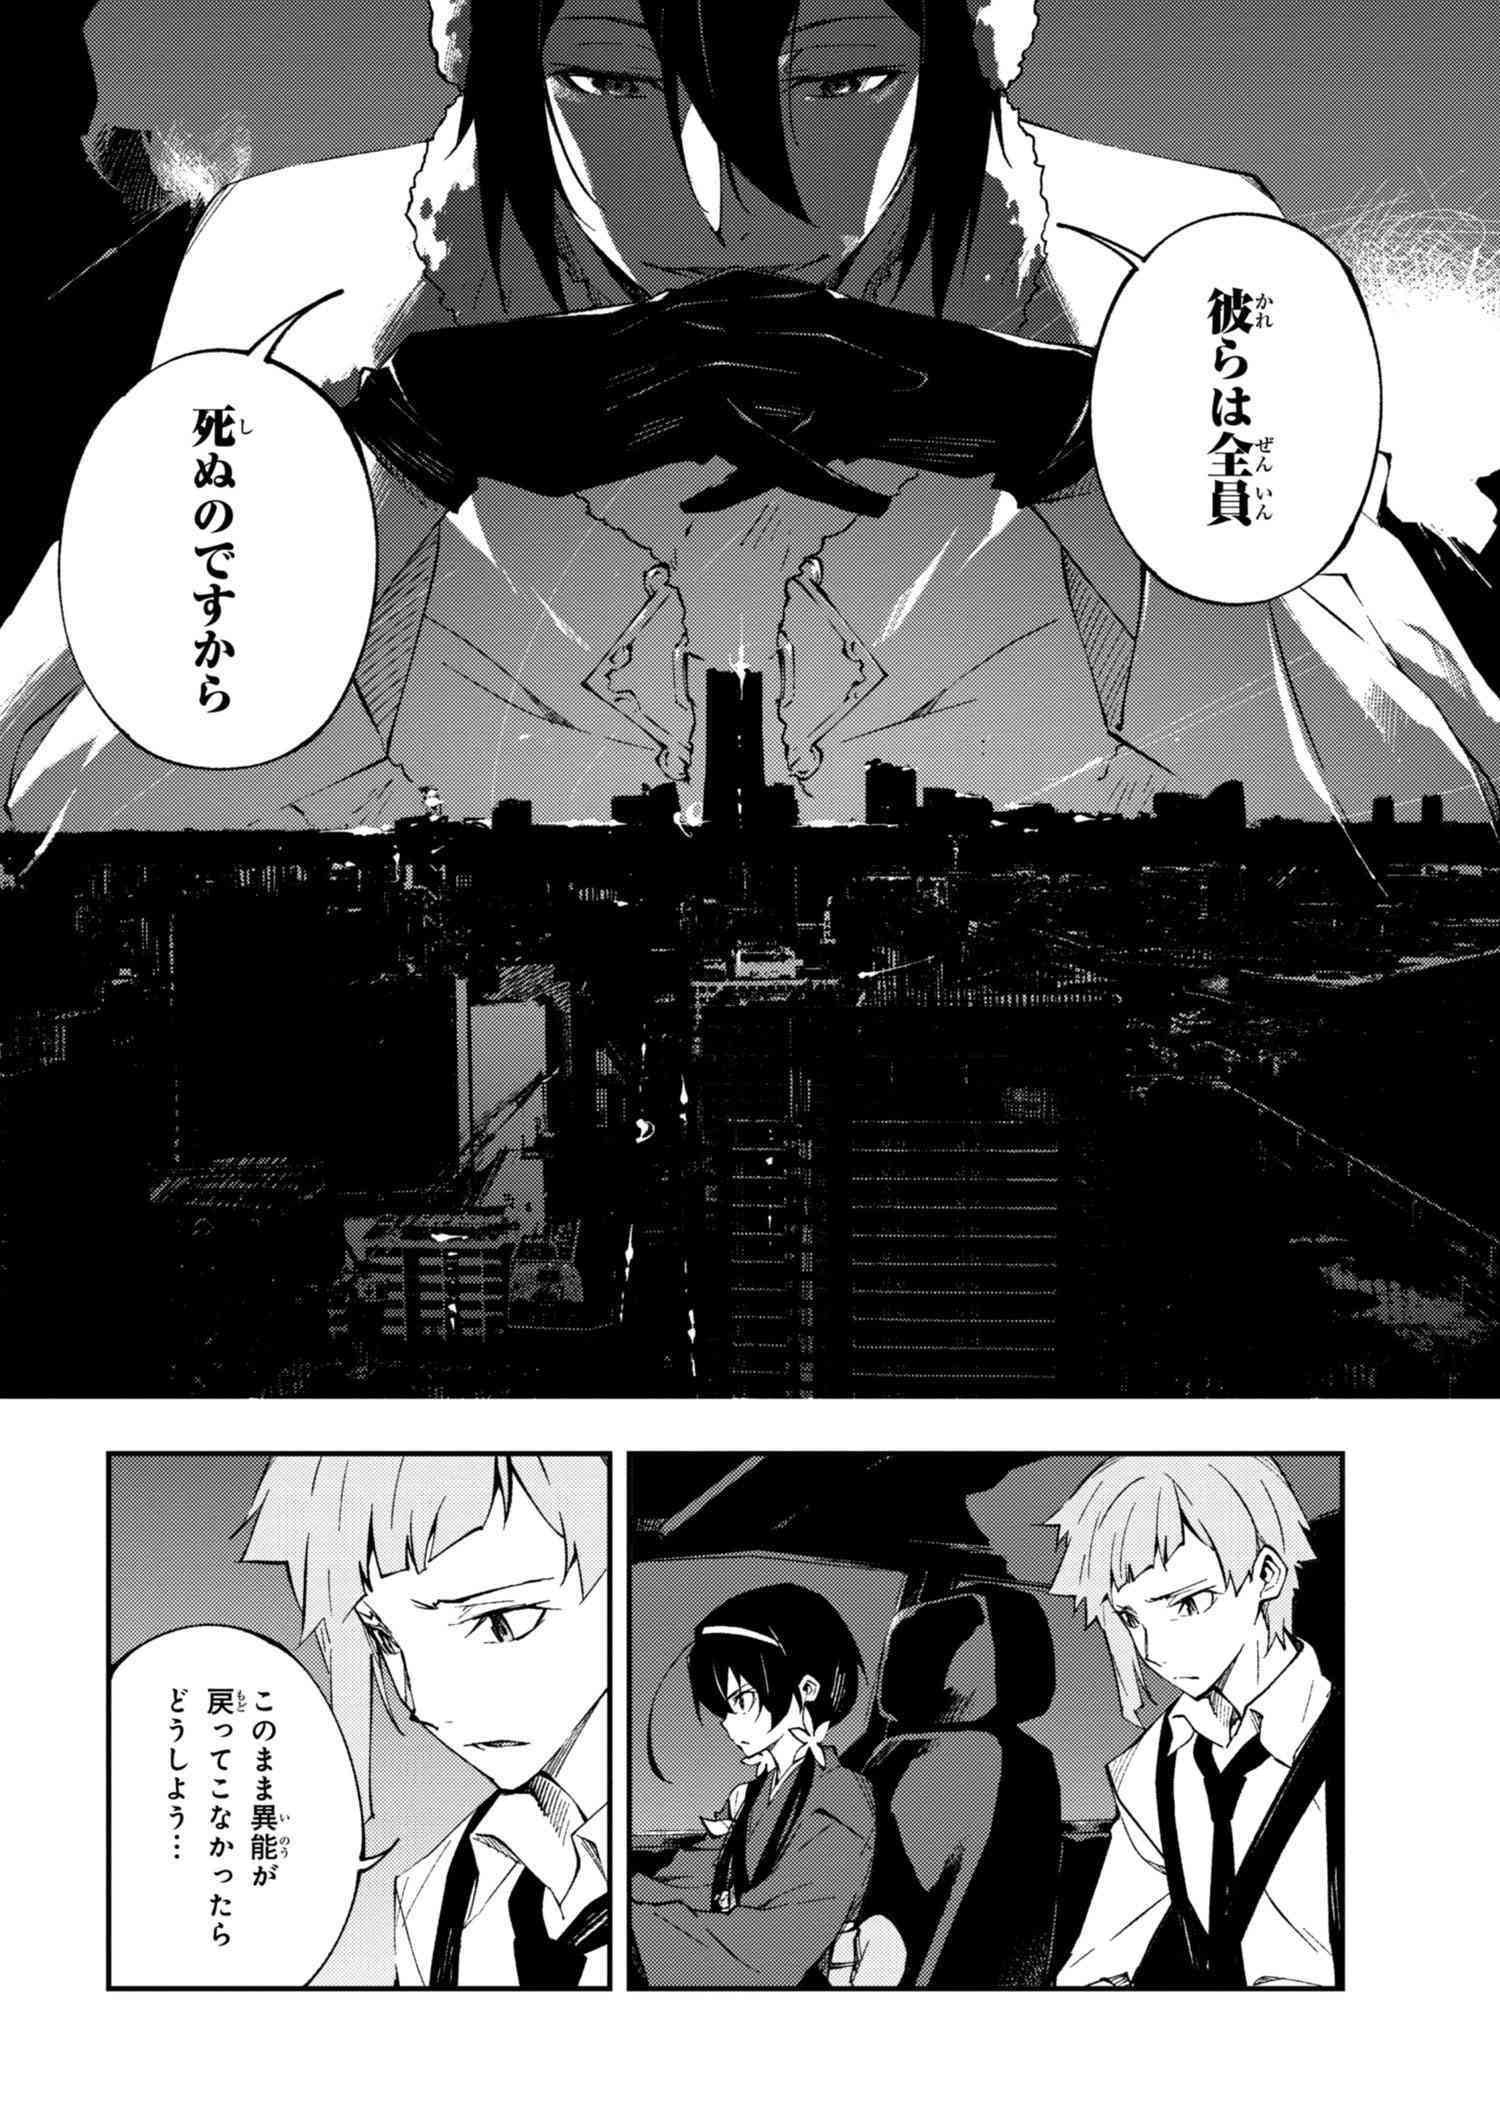 Bungou Stray Dogs: Dead Apple - Chapter 4-1 - Page 15